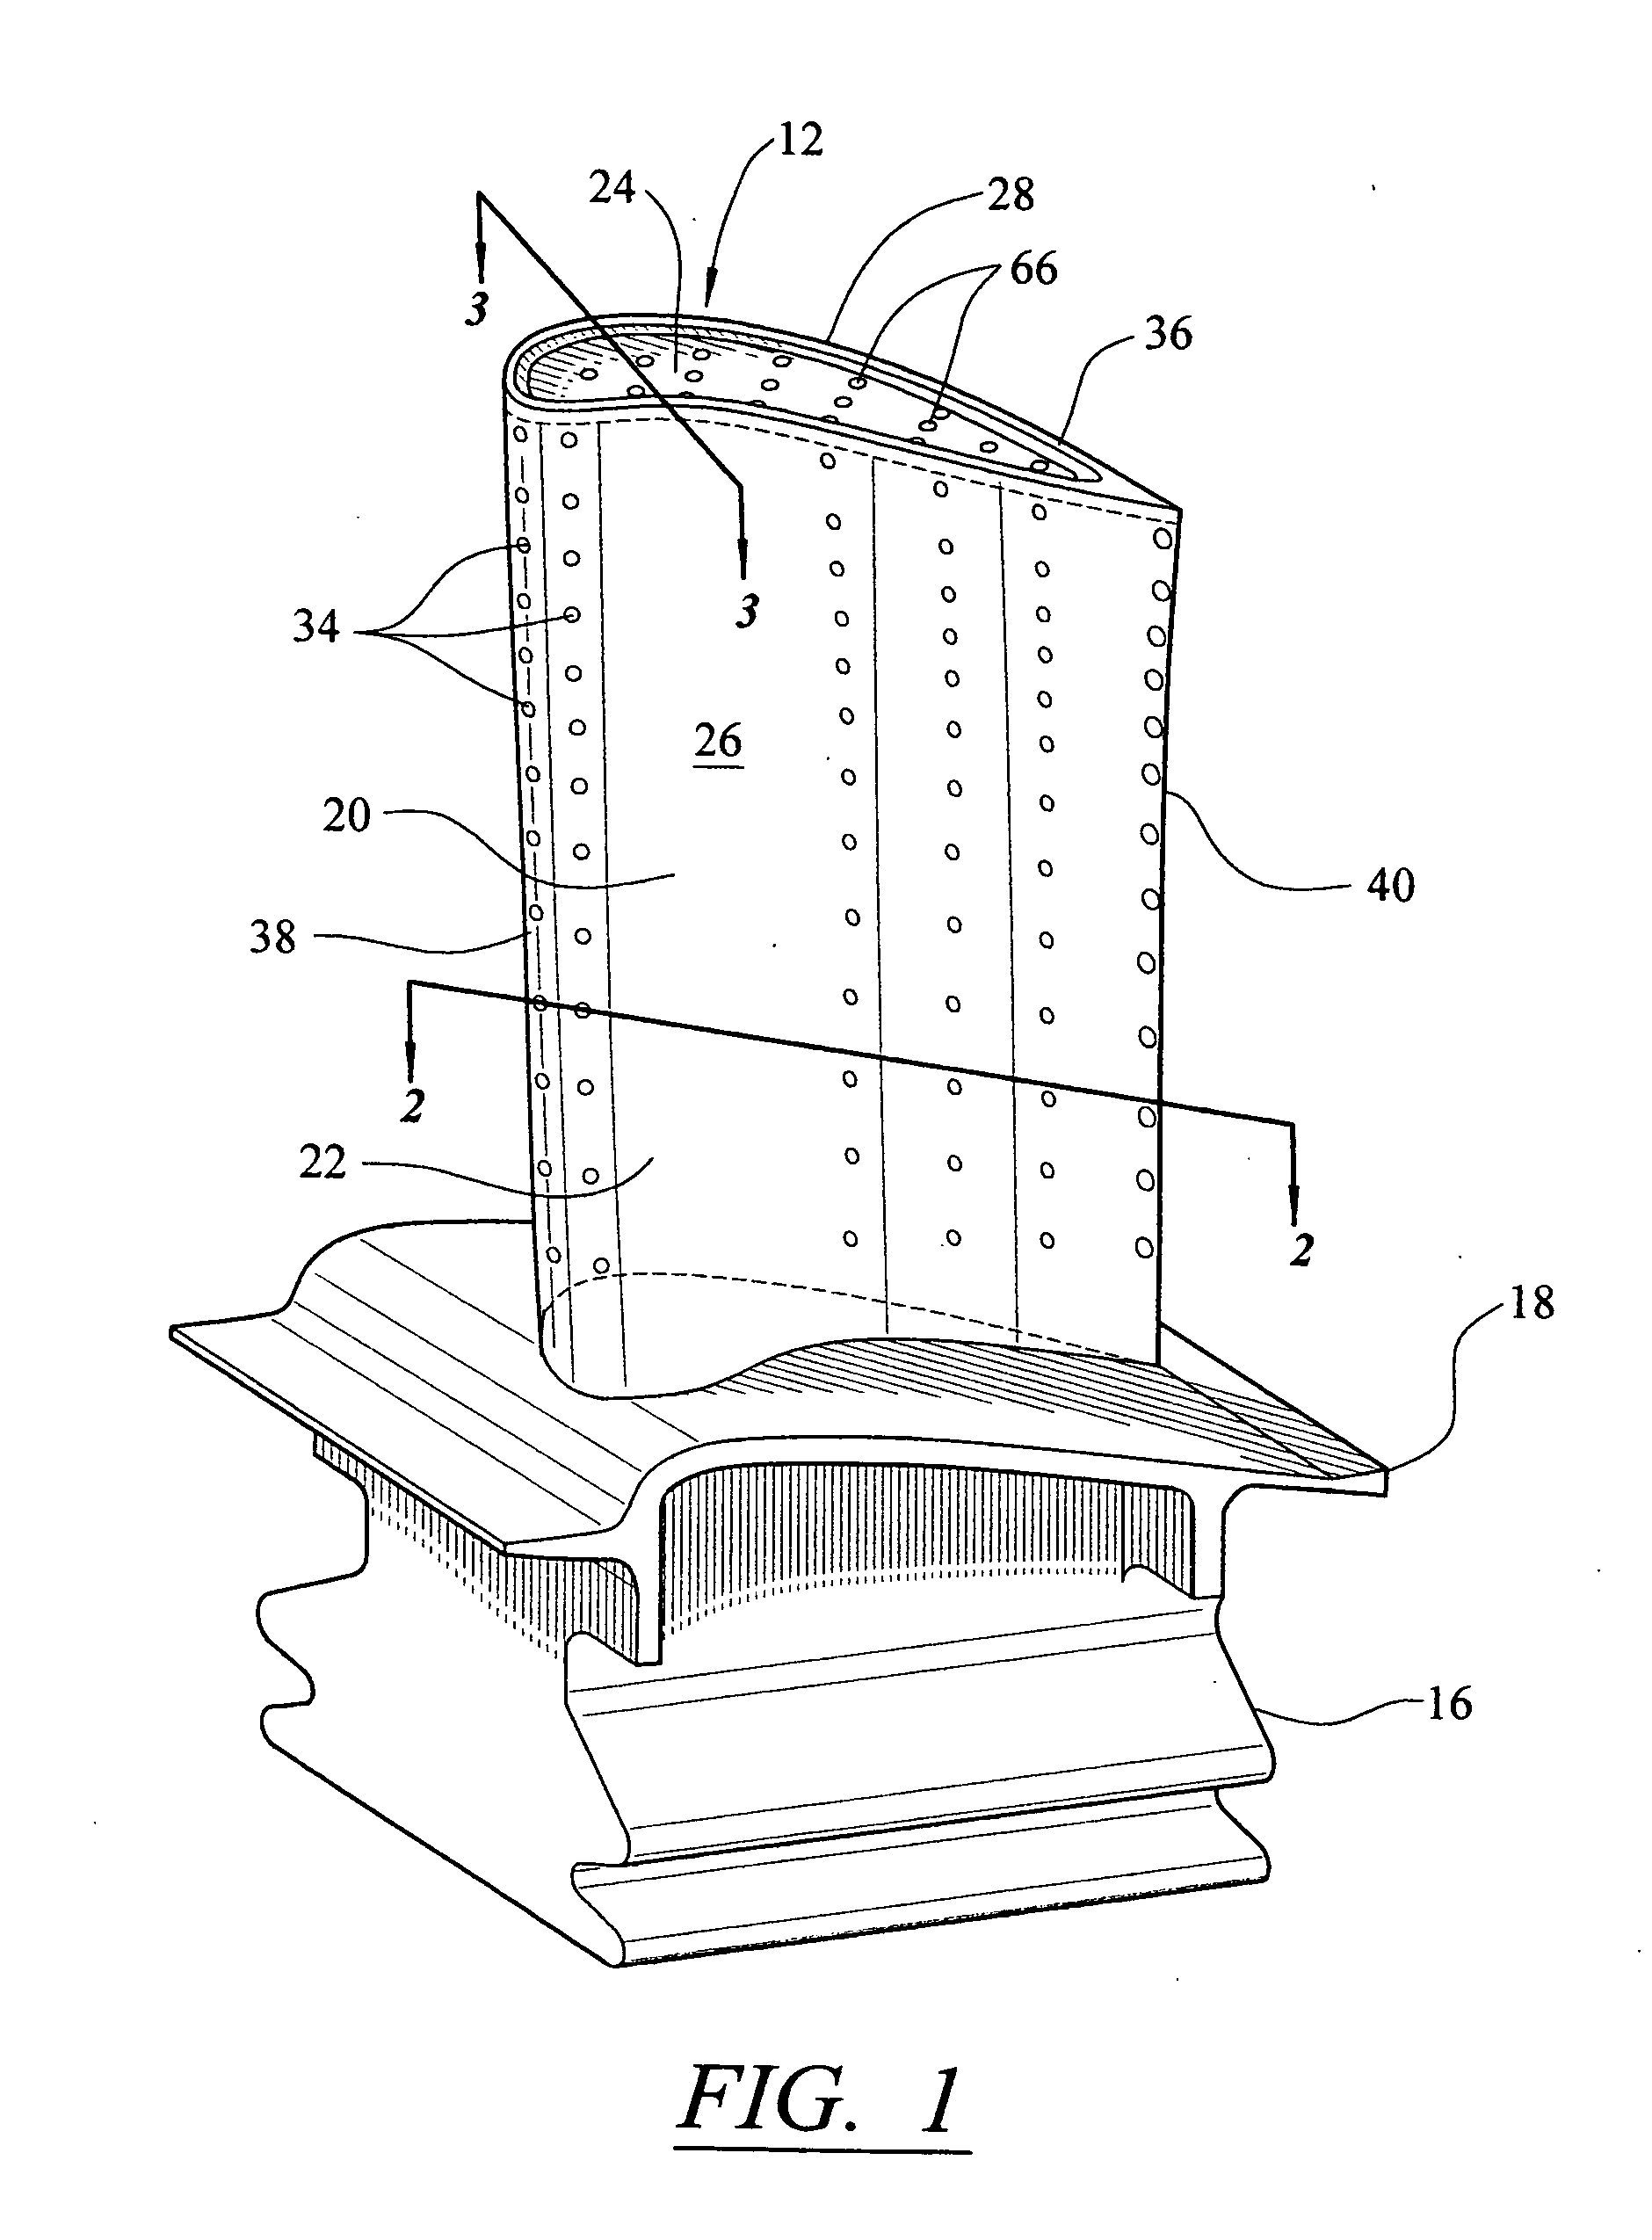 Vortex cooling system for a turbine blade